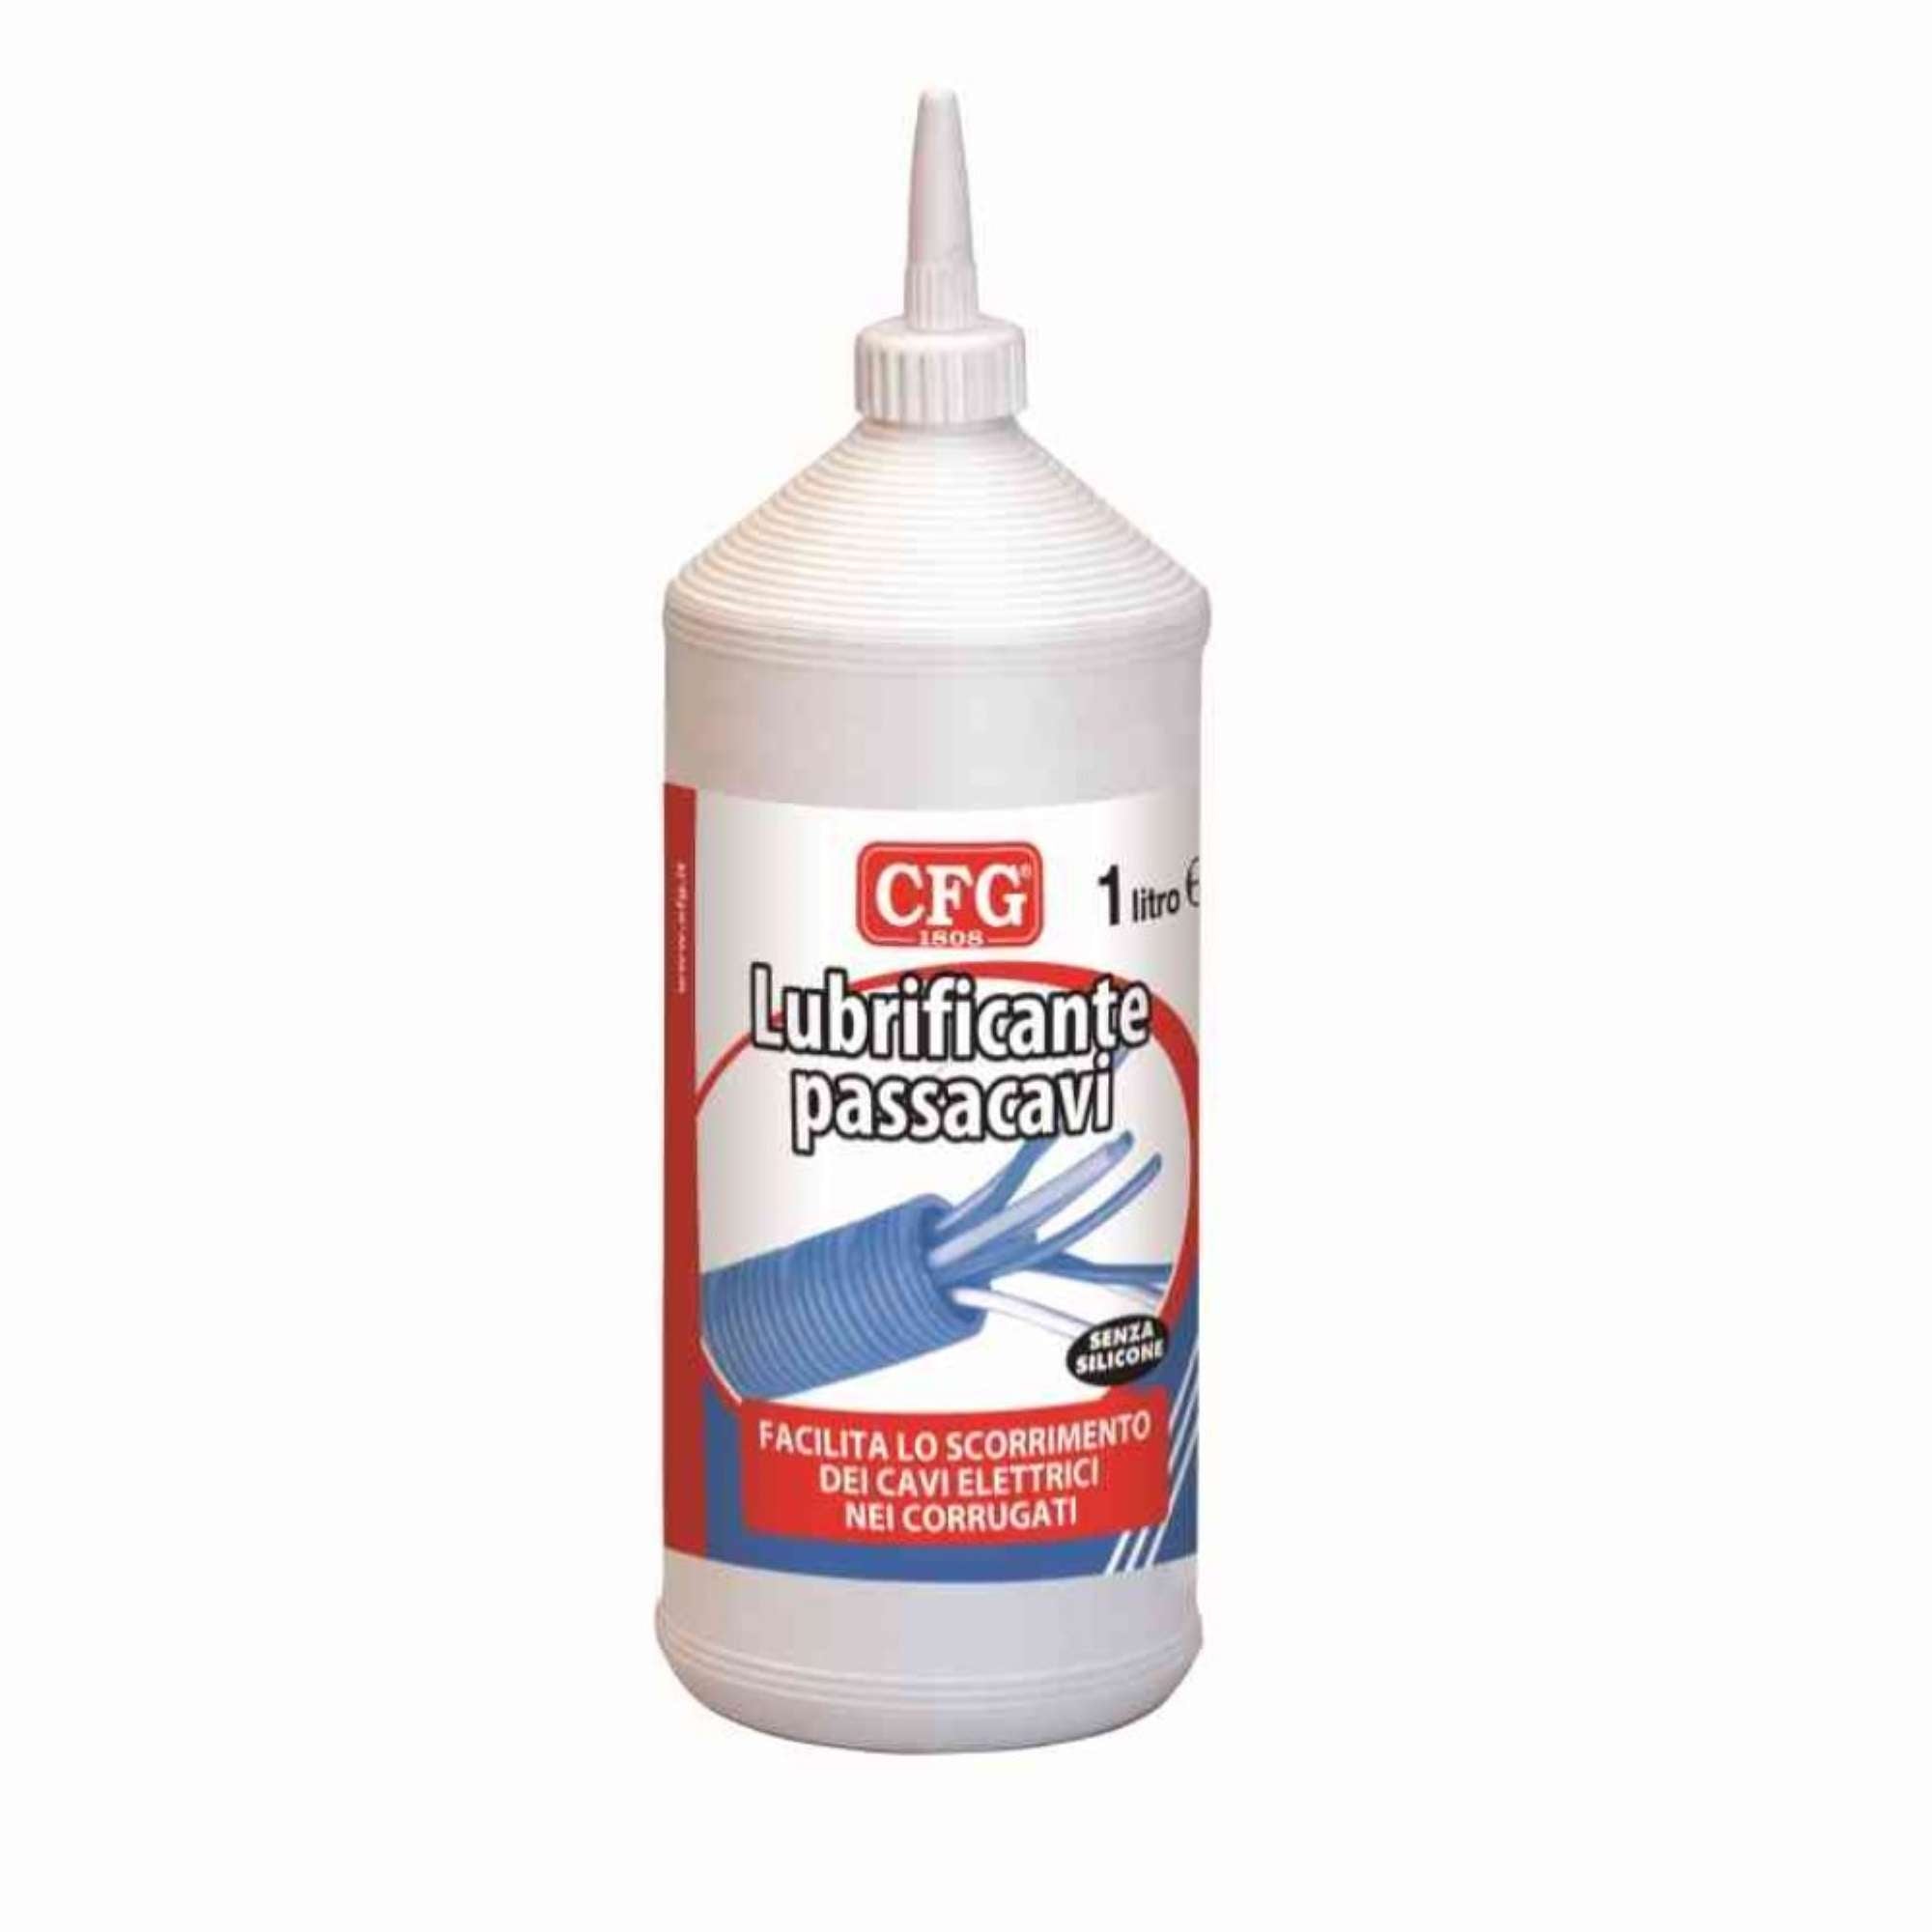 Cable gland lubricant 1 liter - CFG C0501